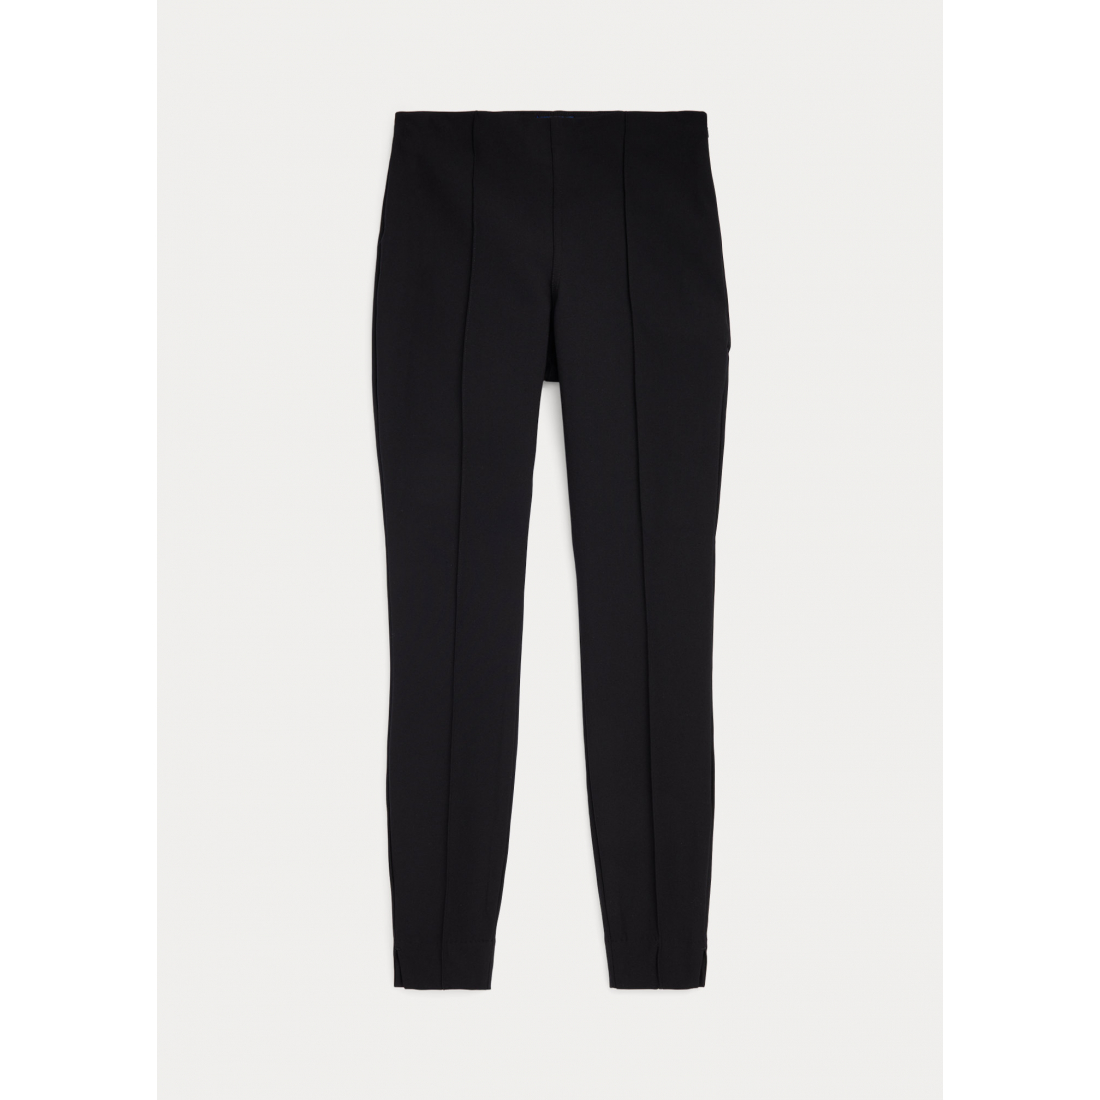 Women's 'Stretch' Trousers